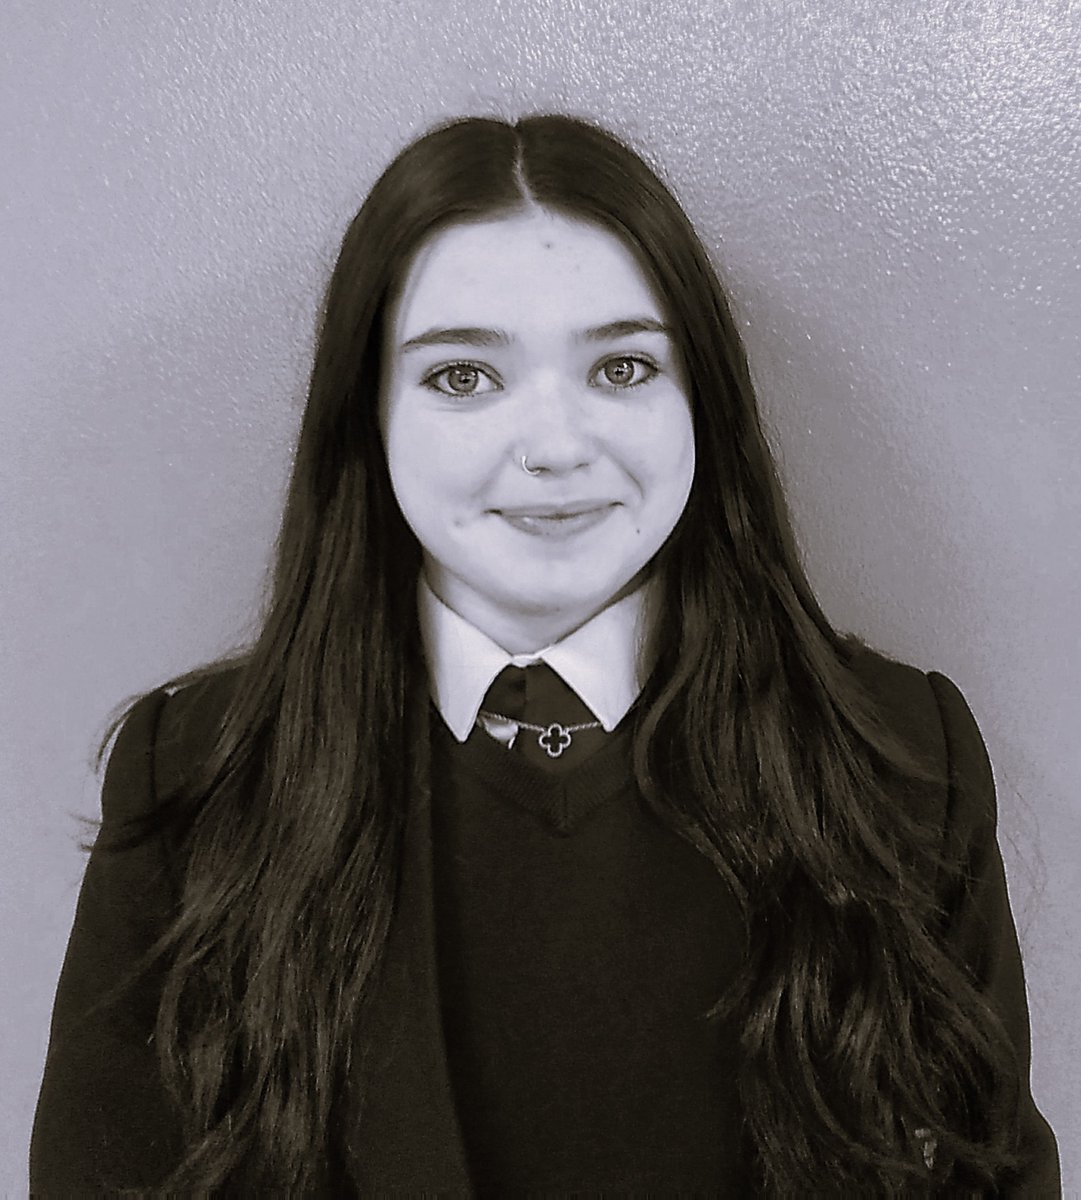 Congratulations to Evie-Mae Mcgregor for securing a 100% scholarship to Redmaids Sixth Form. This is such a great achievement and we are all so proud of you!  #AimingHigh